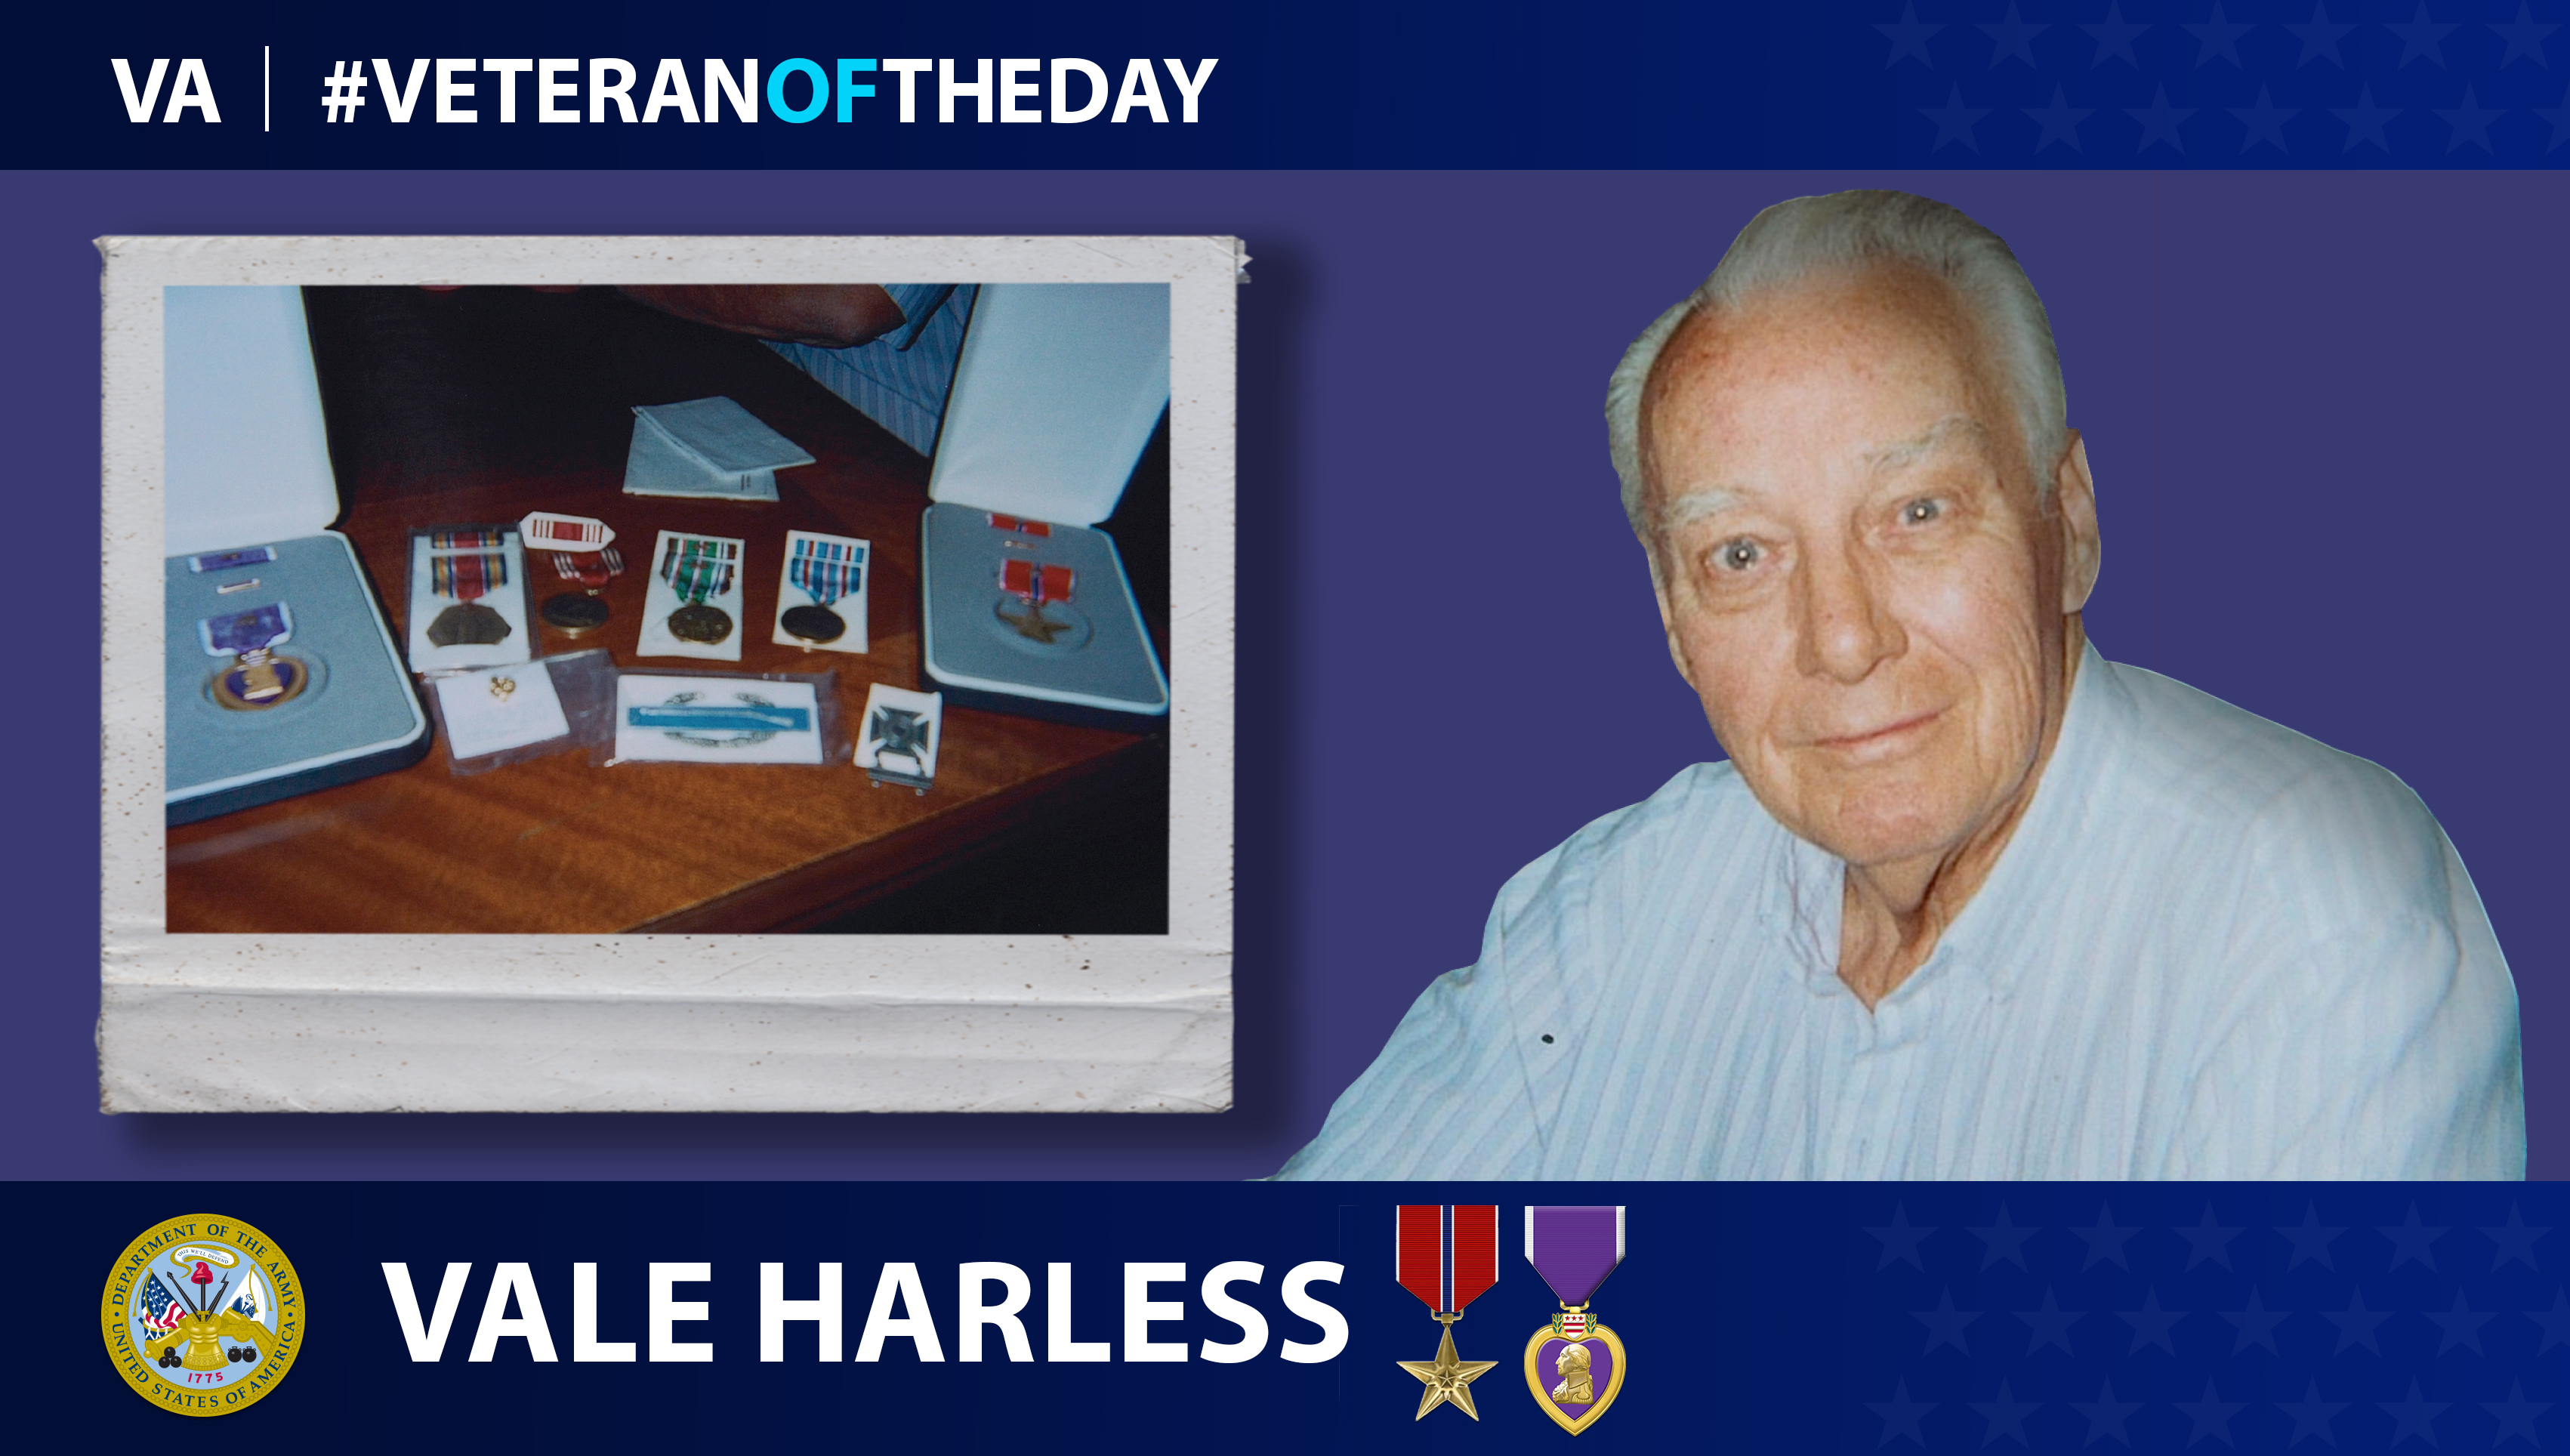 Army Veteran Vale Harless is today's Veteran of the Day.